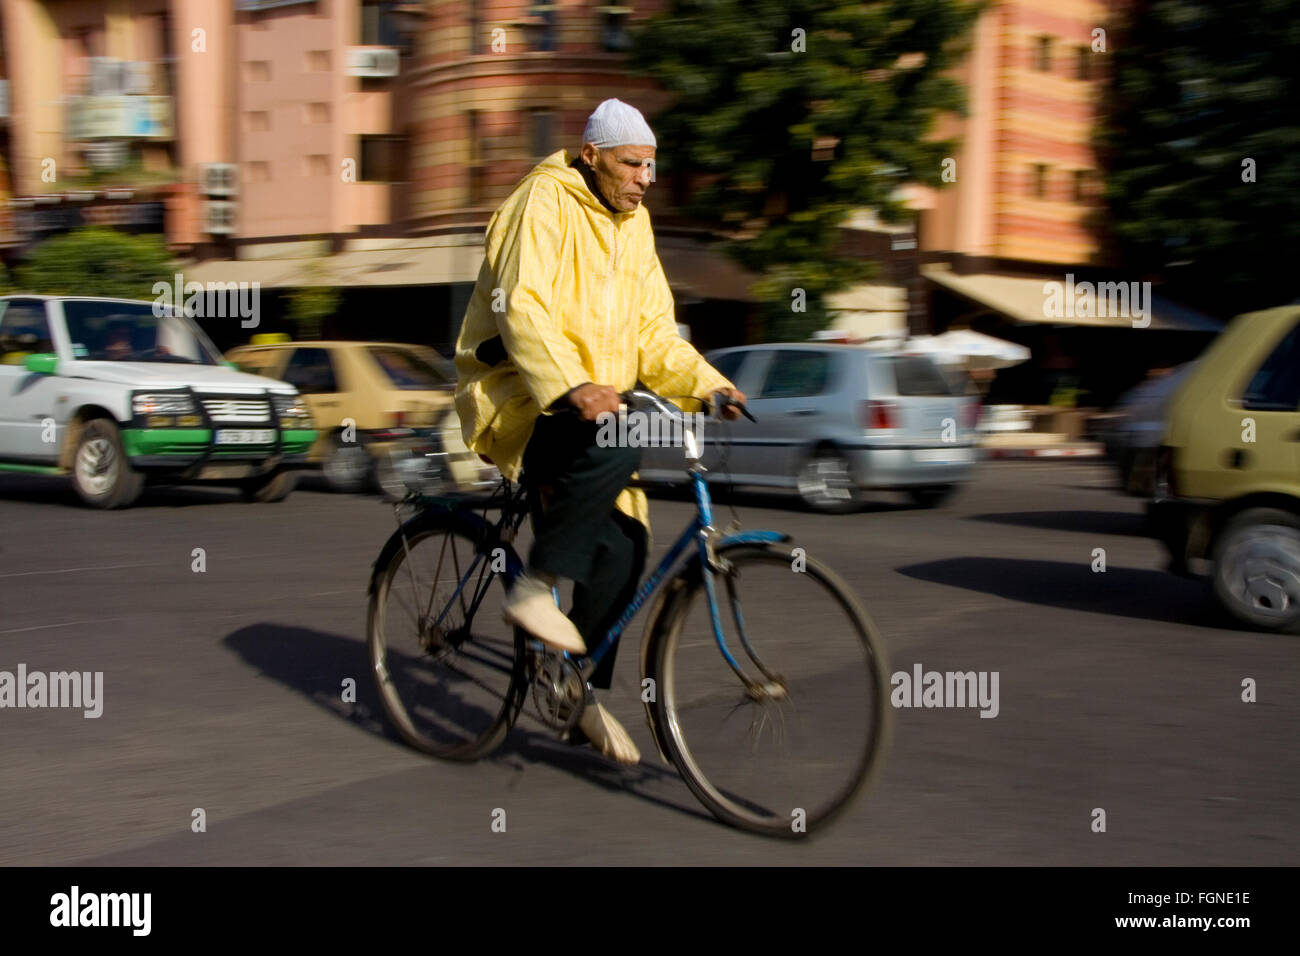 MARRAKECH, MOROCCO - JANUARY 21: unknown person biking on streets on January 21, 2010. With a population of over 900,000 inhabit Stock Photo